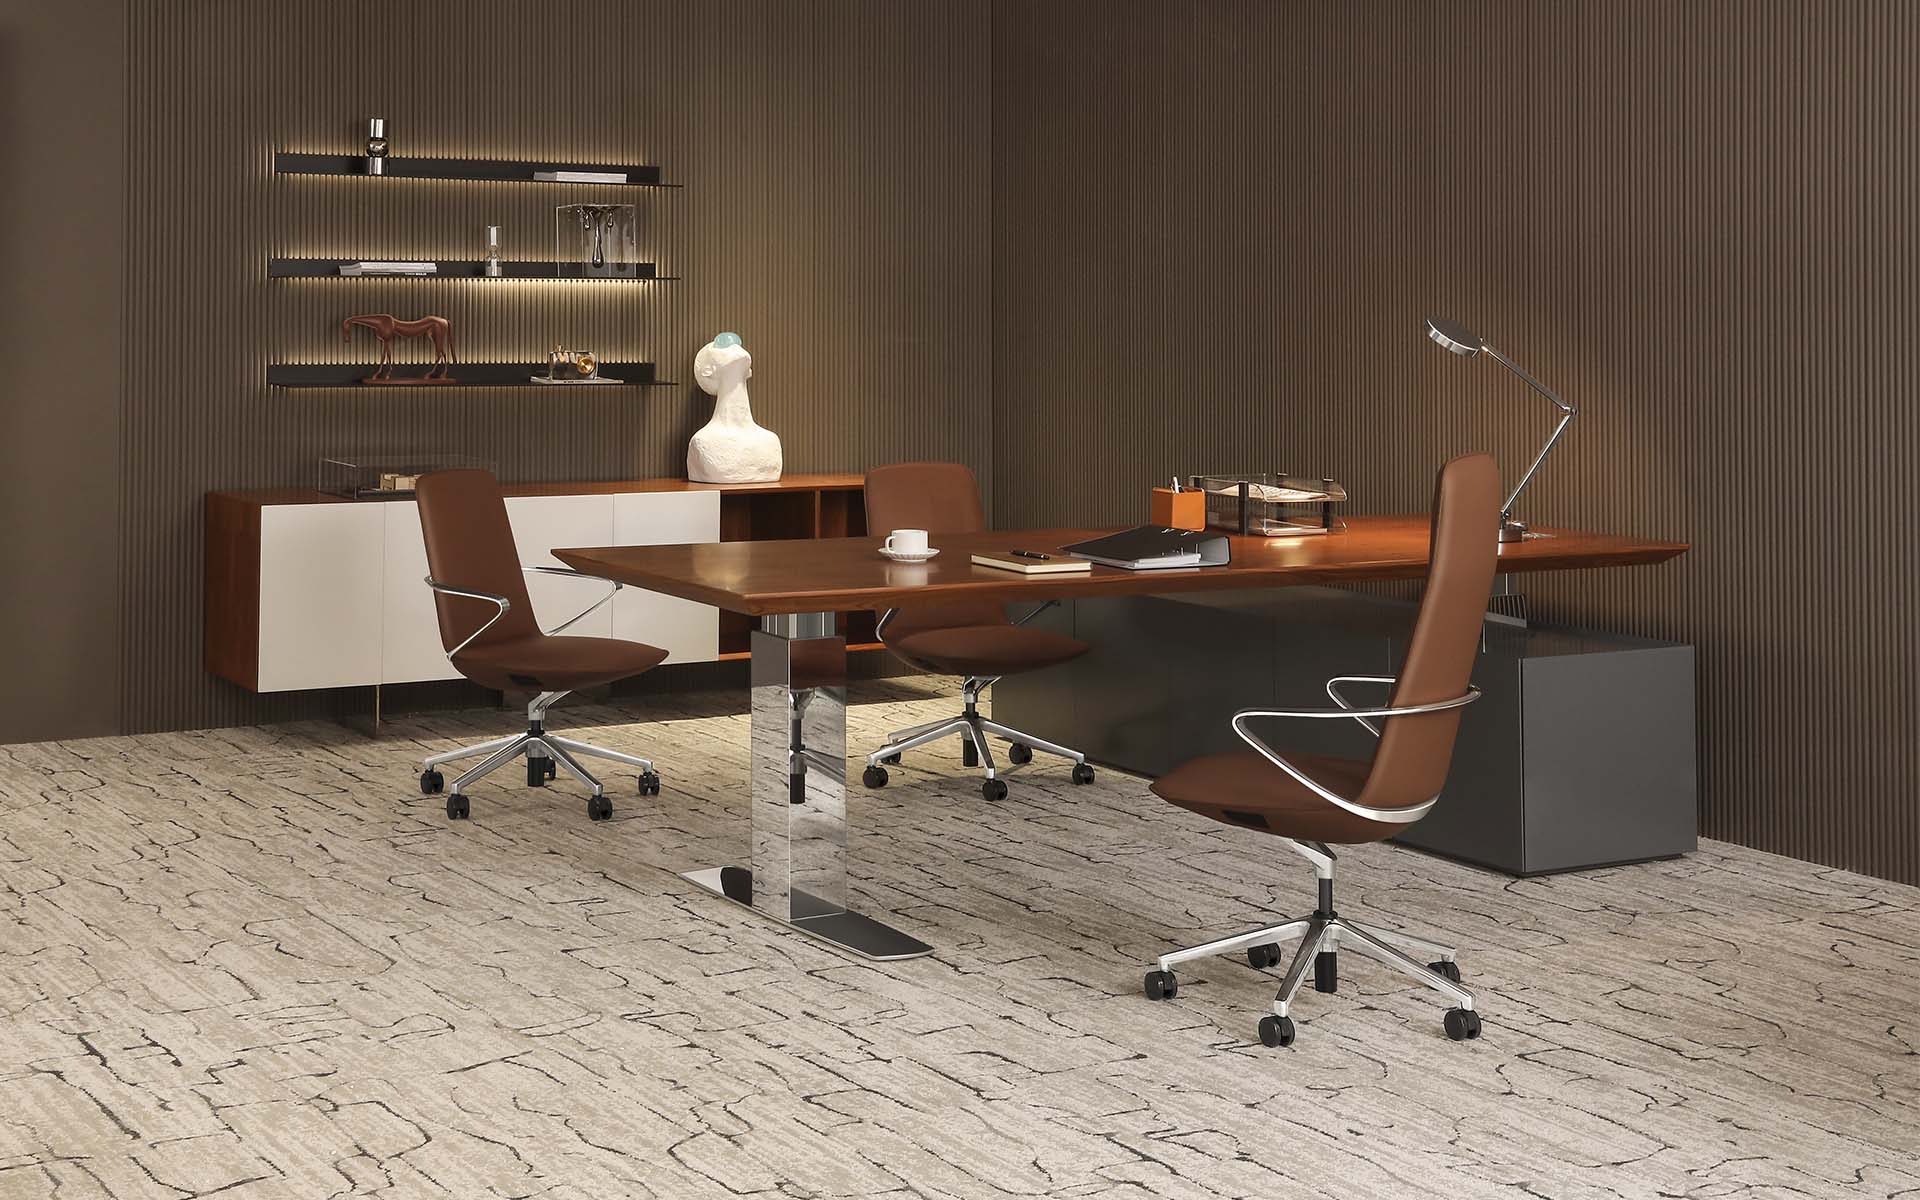 Three brown Goodtone Amola executive chairs by ITO design in a noble office